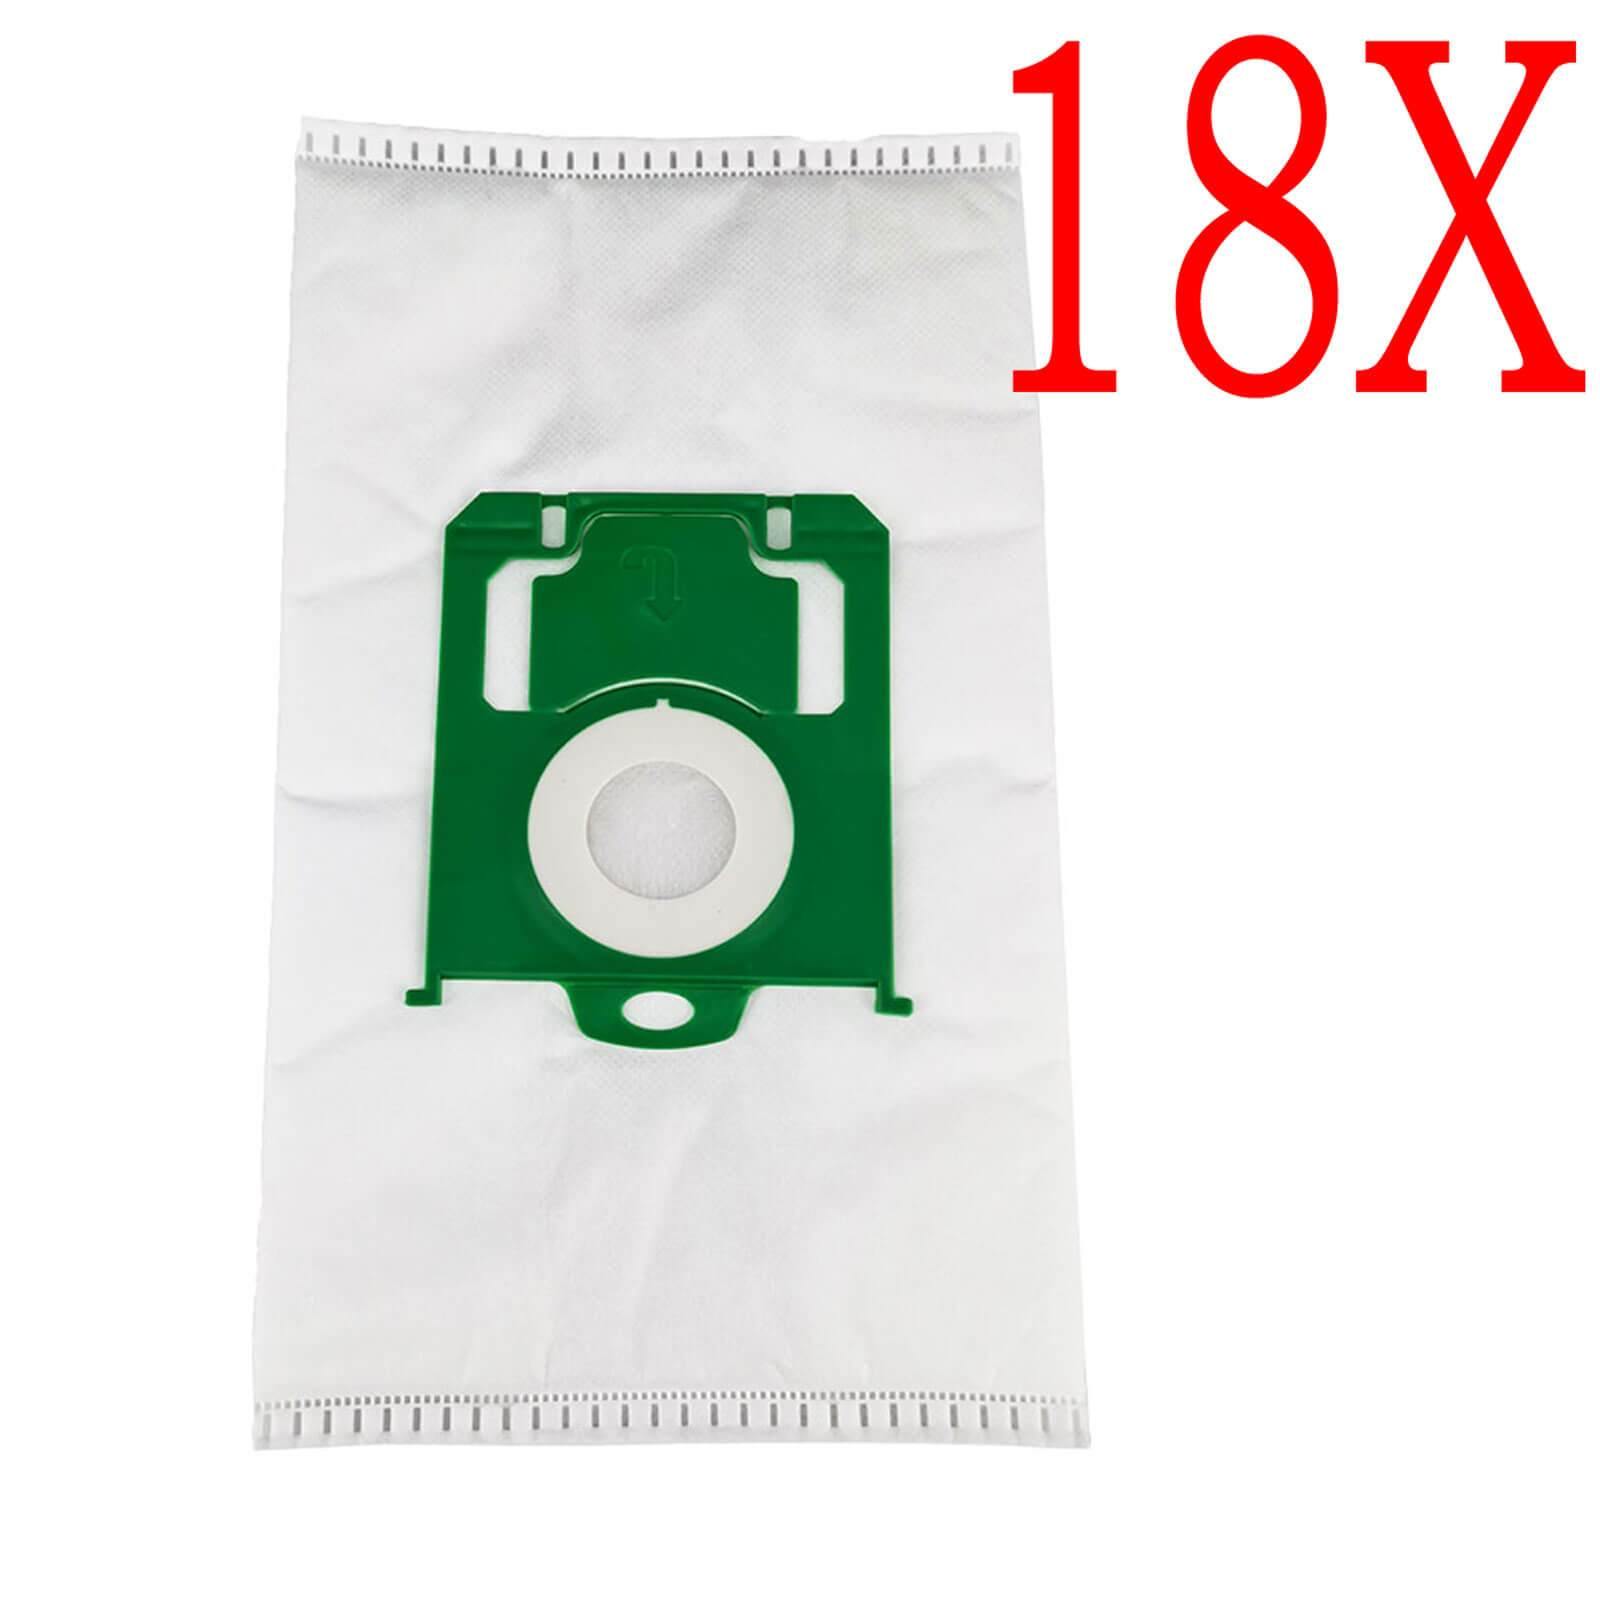 6x Vacuum Cleaner bags compatible for Menalux 1800 T197 T171 Stokes V7250 V8525 Sparesbarn